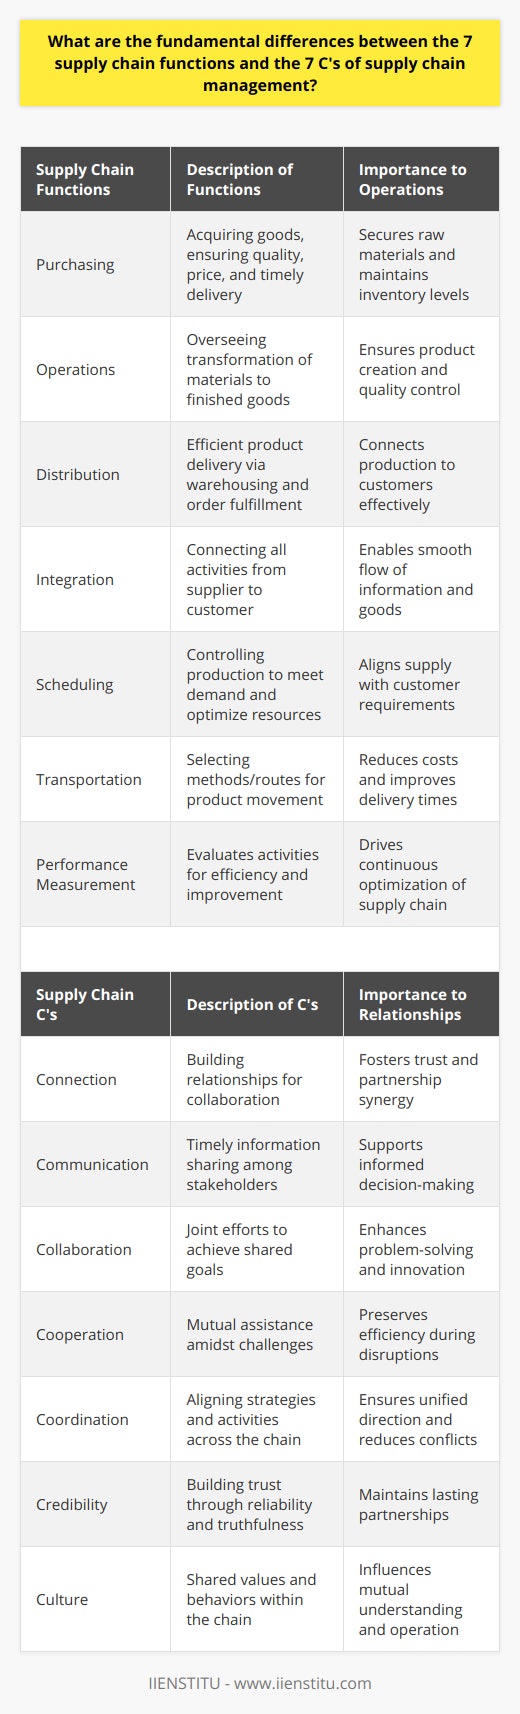 The supply chain is a critical component of modern business operations, ensuring the smooth flow of products from suppliers to end consumers. It encompasses various functions and principles that guide its efficiency and effectiveness. Here we explore the fundamental differences between the seven supply chain functions and the seven C's of supply chain management, shedding light on how each set of principles contributes to overall supply chain optimization.Seven Supply Chain Functions: The Operational PerspectiveThe seven supply chain functions are essential in executing the physical and technical aspects of supply chain management. These functions are:1. Purchasing: Acquiring raw materials or goods from suppliers, ensuring the best quality, price, and delivery terms.2. Operations: Managing all processes that transform raw materials into finished products, including manufacturing and quality control.3. Distribution: Ensuring efficient delivery of products to customers through warehousing, order management, and fulfillment processes.4. Integration: Seamlessly connecting all supply chain activities, from supplier to customer, to enable smooth flow of information and products.5. Scheduling: Planning and controlling production schedules to meet customer demands and optimize resource utilization.6. Transportation: Selecting the most efficient methods and routes for moving products between locations.7. Performance Measurement: Evaluating supply chain activities to measure efficiency, effectiveness, and to identify areas of improvement.Seven C's of Supply Chain Management: The Relationship PerspectiveThe seven C's of supply chain management, on the other hand, emphasize the importance of forging strong relationships and clear communication across the supply chain. The seven C's include:1. Connection: Establishing formal and informal contacts and relationships between supply chain partners to facilitate collaboration.2. Communication: Sharing relevant information in a timely manner between stakeholders to ensure visibility and make informed decisions.3. Collaboration: Working together to achieve common goals, sharing risks and rewards, and creating synergies.4. Cooperation: Mutual assistance among supply chain actors to maintain efficiency even in the face of challenges and disruptions.5. Coordination: Aligning strategies and activities of various supply chain participants to ensure a cohesive approach.6. Credibility: Building trust through reliability, truthfulness, and fulfilling commitments among supply chain partners.7. Culture: Cultivating a shared set of values, beliefs, and behaviors that influence the way supply chain members interact with one another.The Interplay of Functions and PrinciplesWhile the seven supply chain functions describe specific, action-focused aspects crucial for logistical operations, the seven C's go beyond the mechanics, stressing the softer, relationship-oriented elements necessary for strategic collaboration.To truly grasp the essence of a capable supply chain, one must consider the syntactical interplay between the operational functions and the facilitating Cs. The effective execution of supply chain functions is heavily reliant on the foundational relationships and communications provided by adhering to the 7 C's.By understanding the distinct roles of both the seven functions and the seven C's, businesses, such as those educated in institutions like IIENSTITU, can cultivate a comprehensive supply chain approach that combines practical operations with strategic partnerships. The ultimate goal is to not only transport goods but also to create value through cooperation, adjustment, and shared vision.